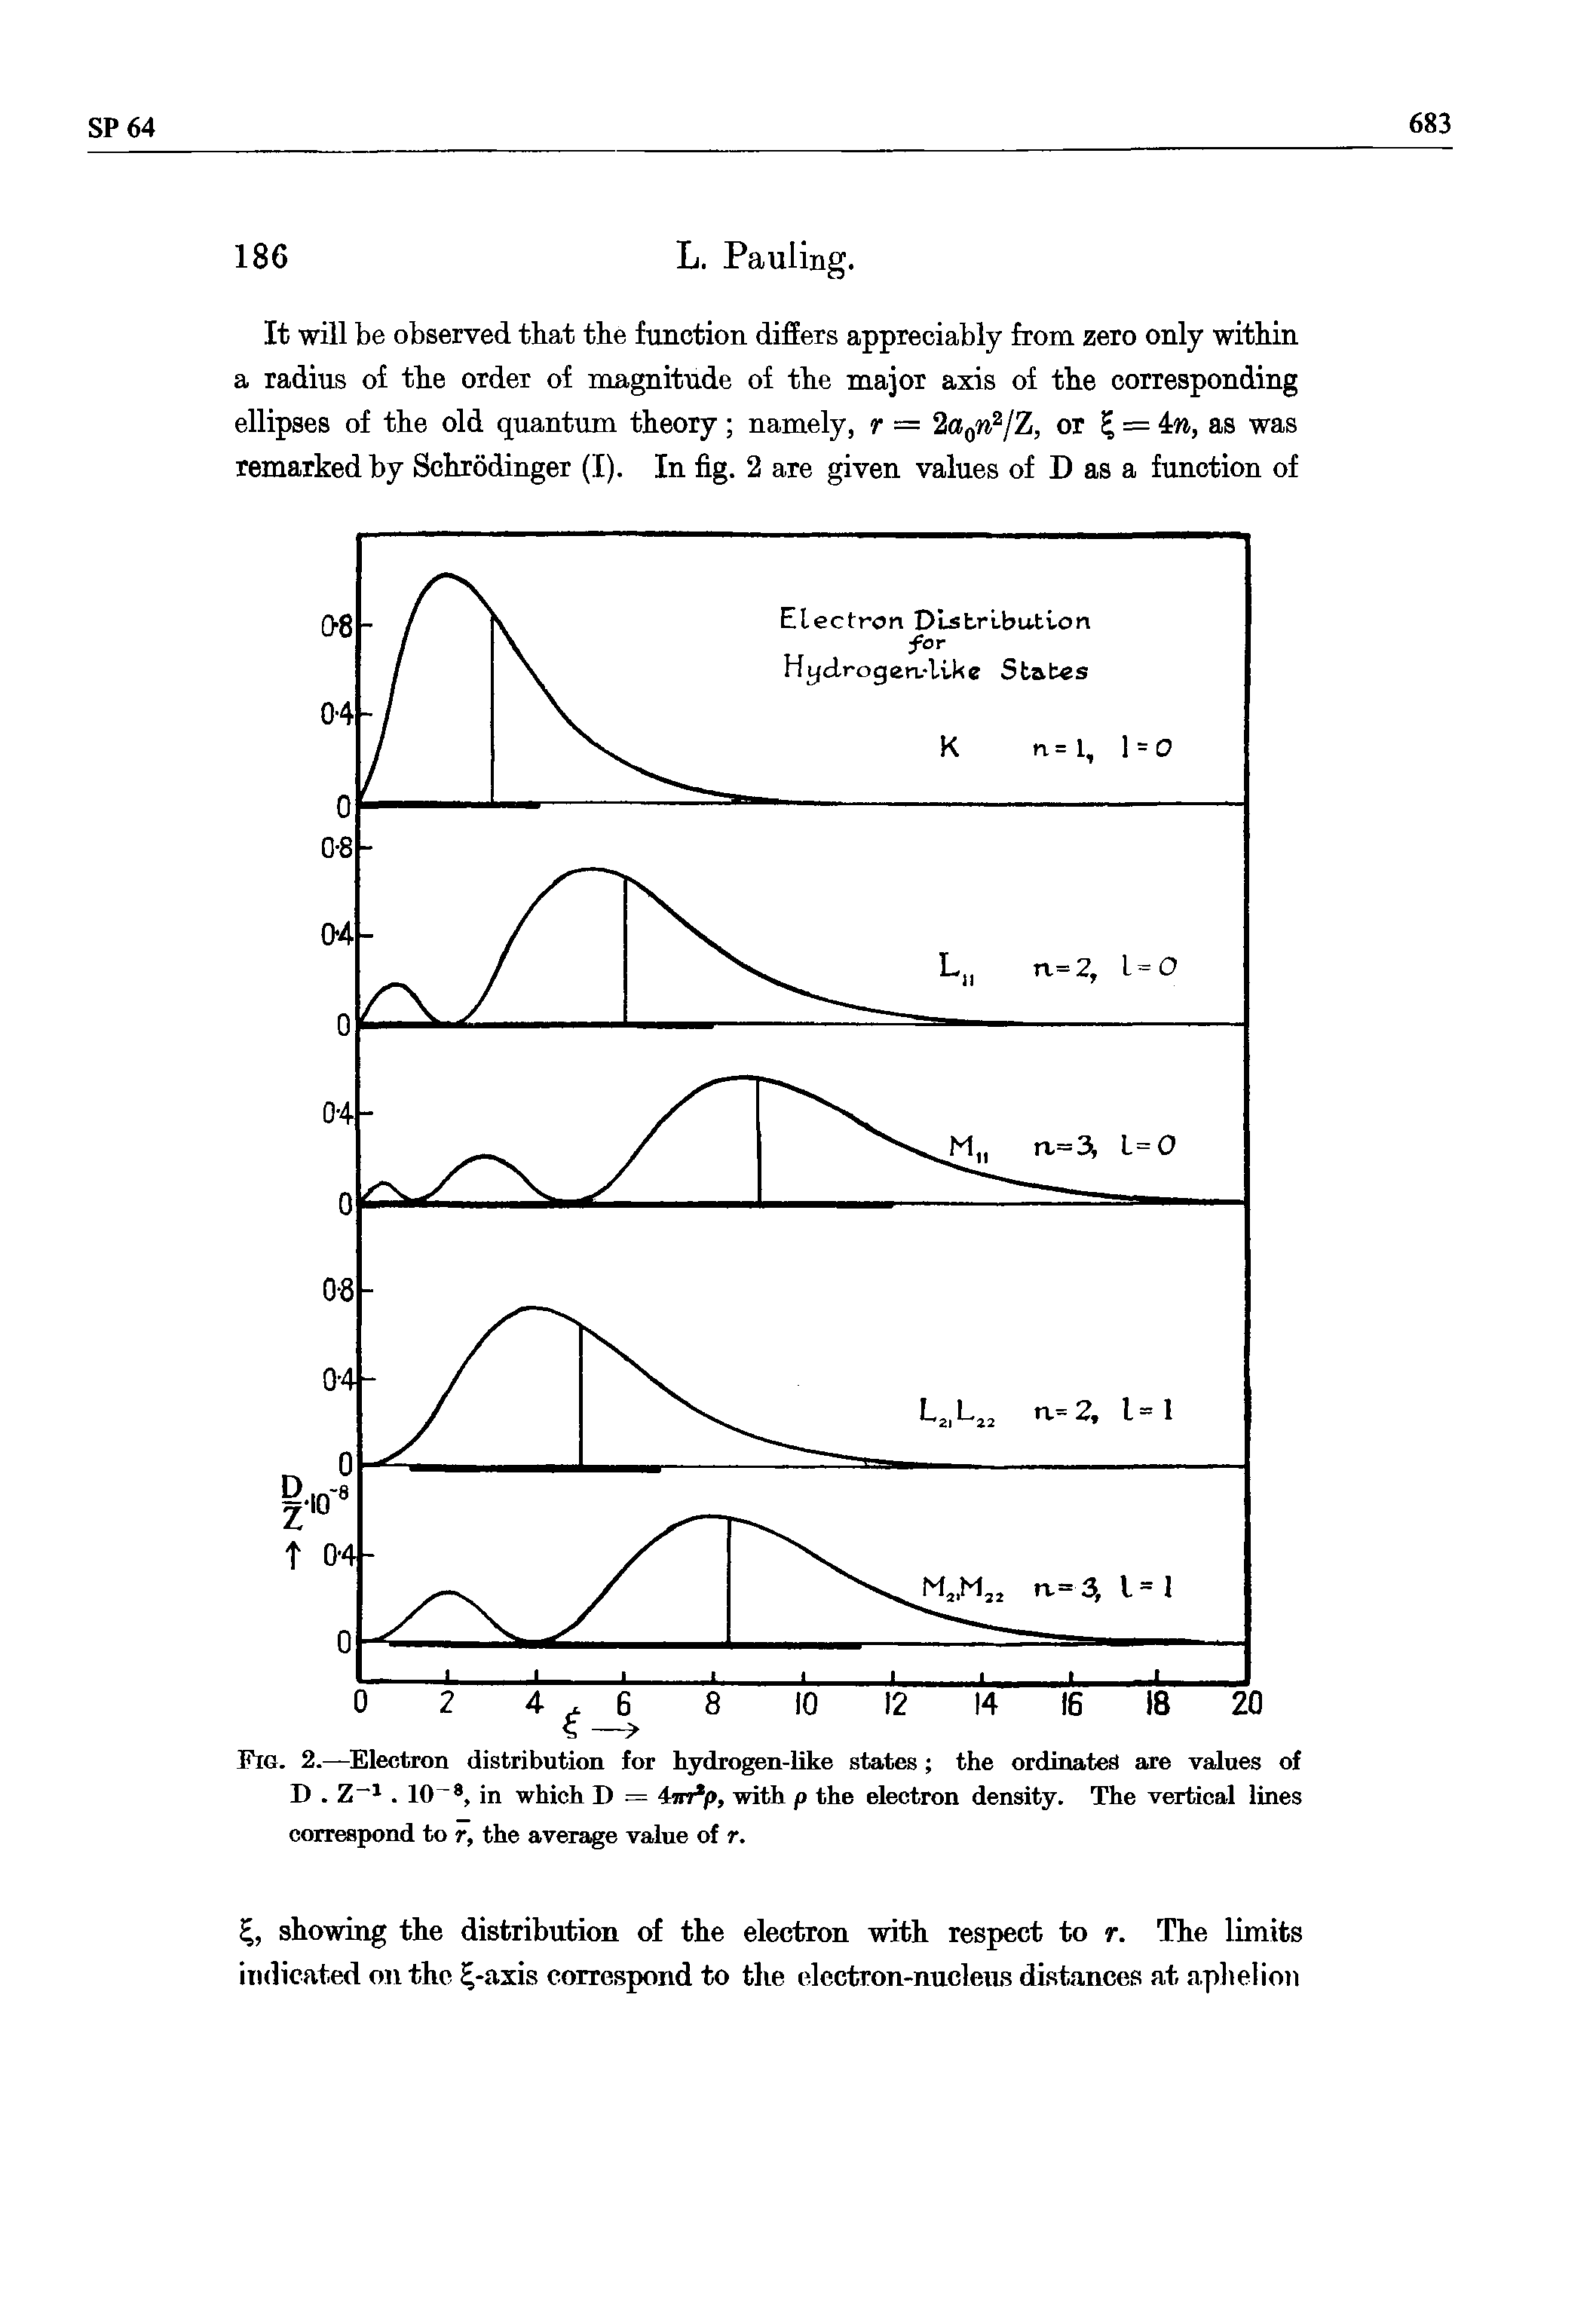 Fig. 2.—Electron distribution for hydrogen-like states the ordinates are values of D. Z-1. 10 8, in which D = 4mxp, with p the electron density. The vertical lines correspond to r, the average value of r.